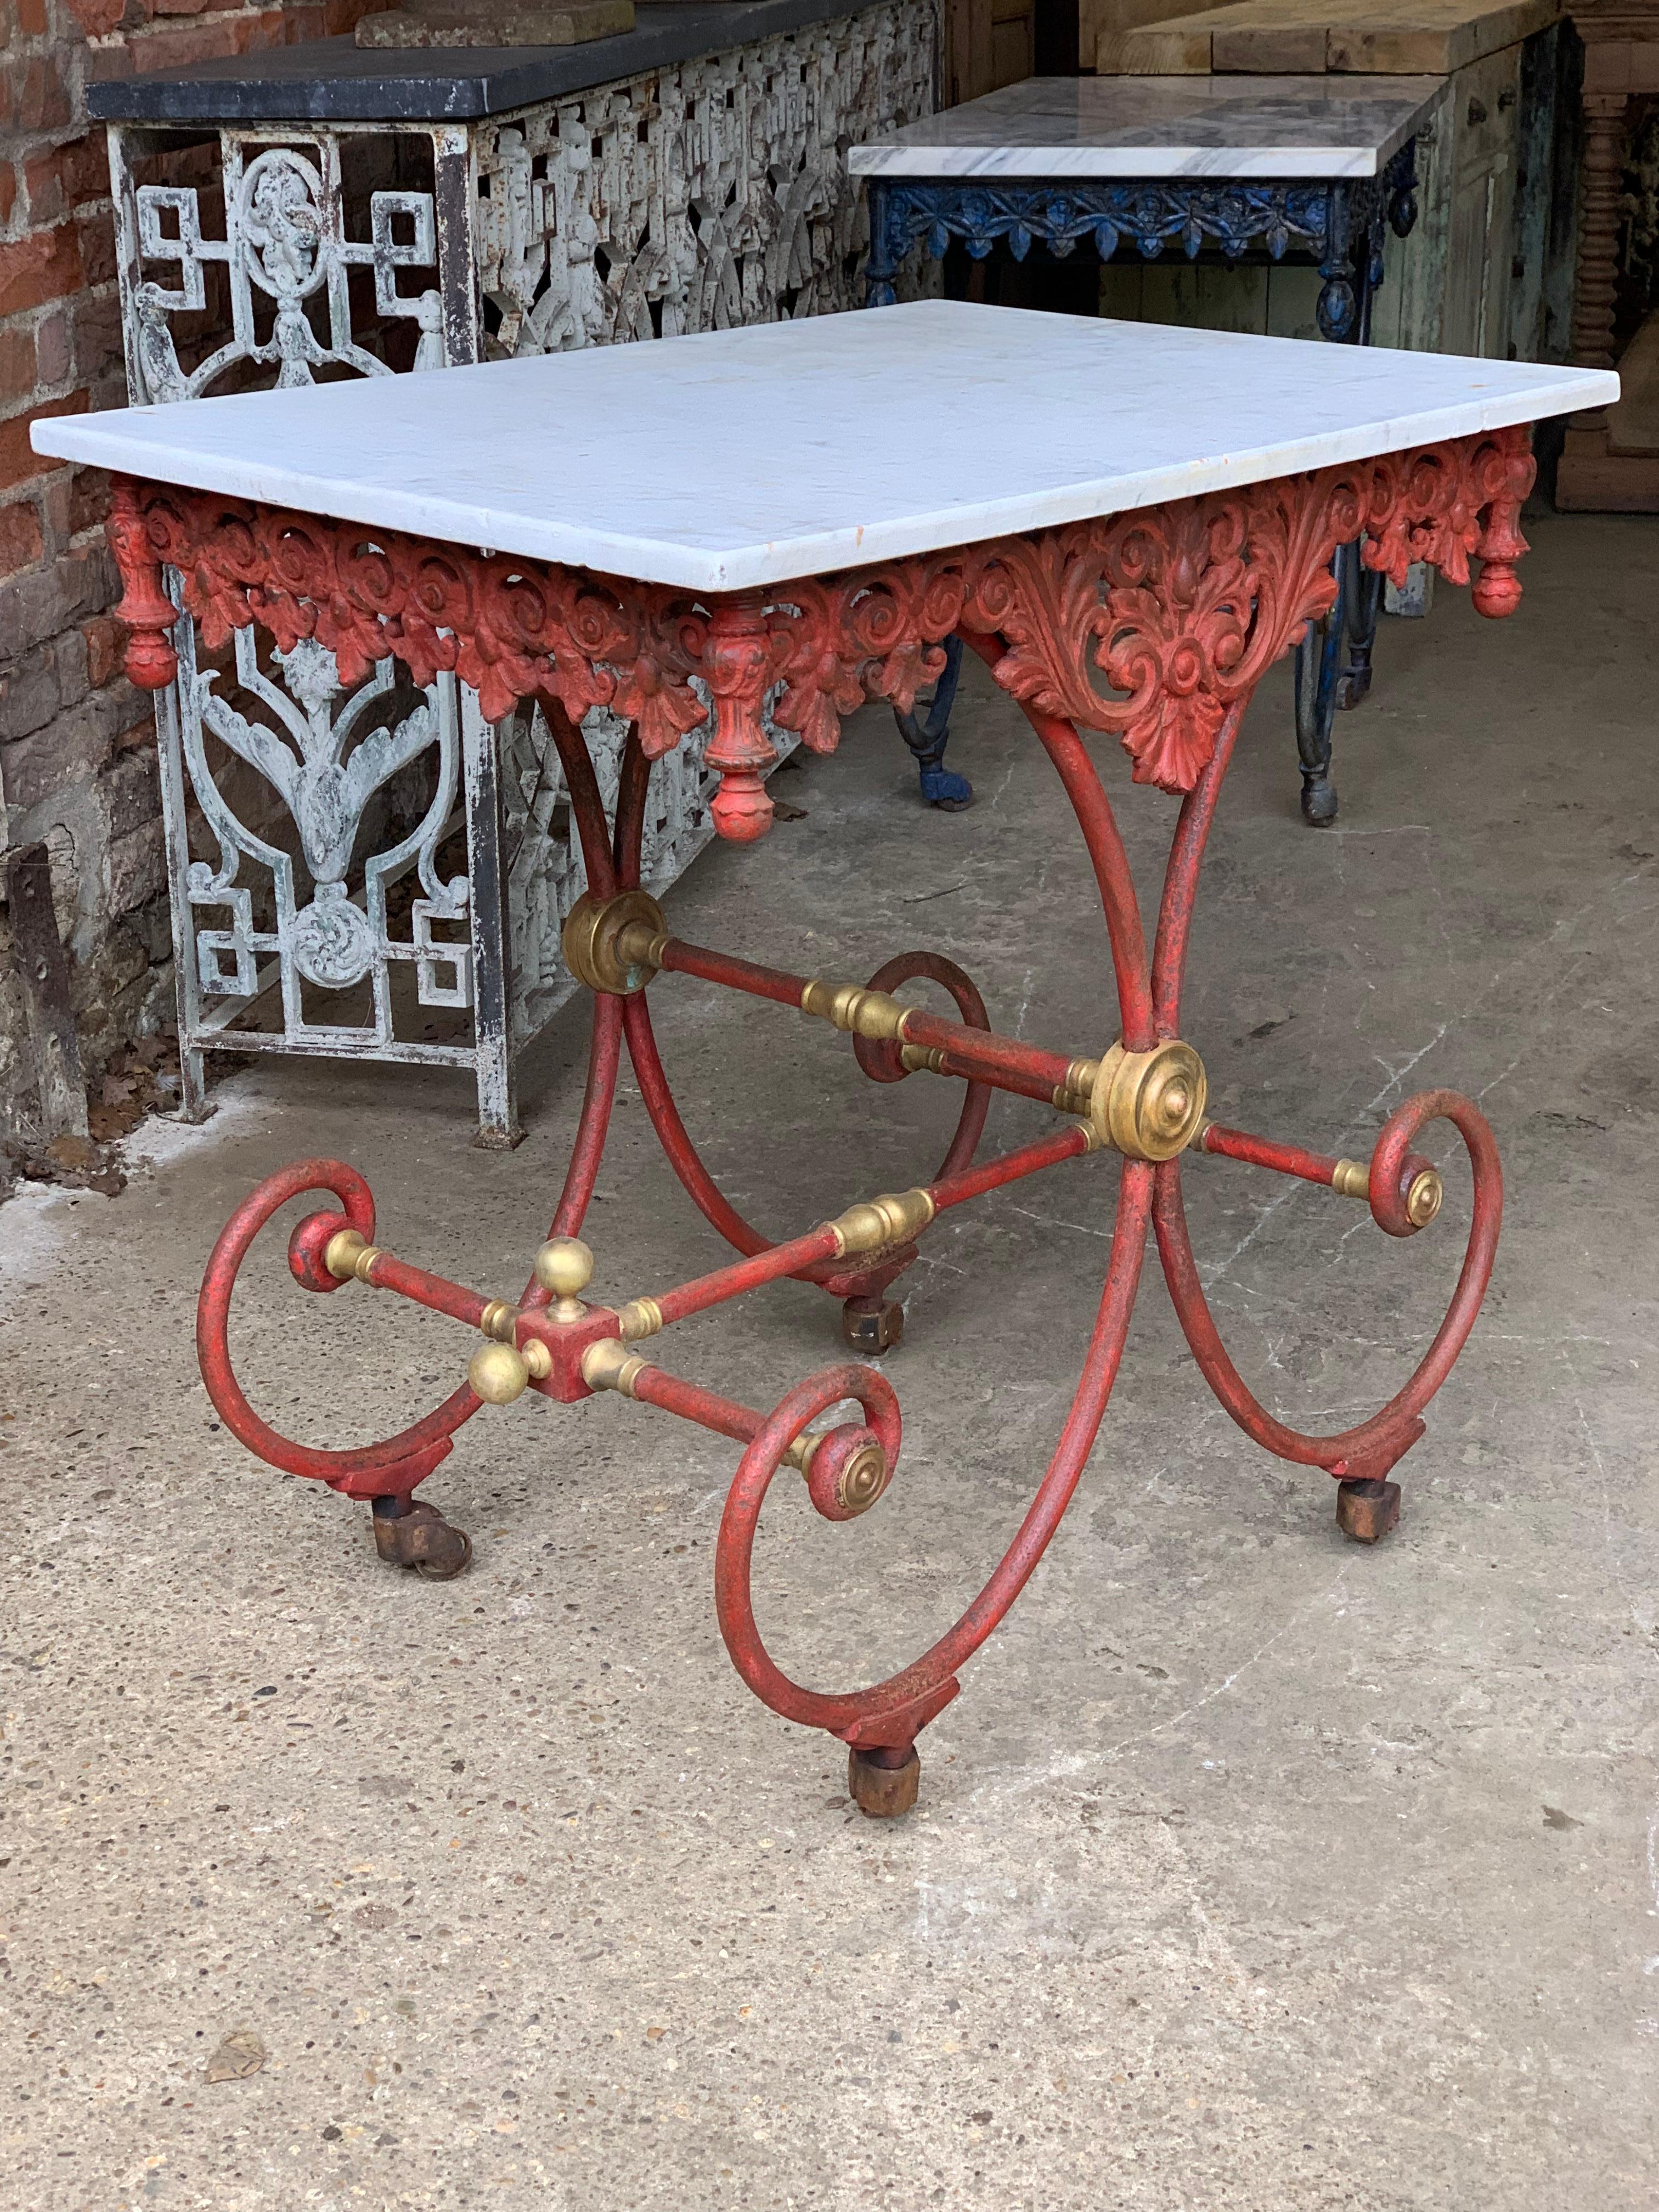 A beautiful 19th century French patisserie table with an iron base and original marble top. It has lovely old worn paint giving it a great look. These style of tables were used to display cakes in the patisserie shops of France.